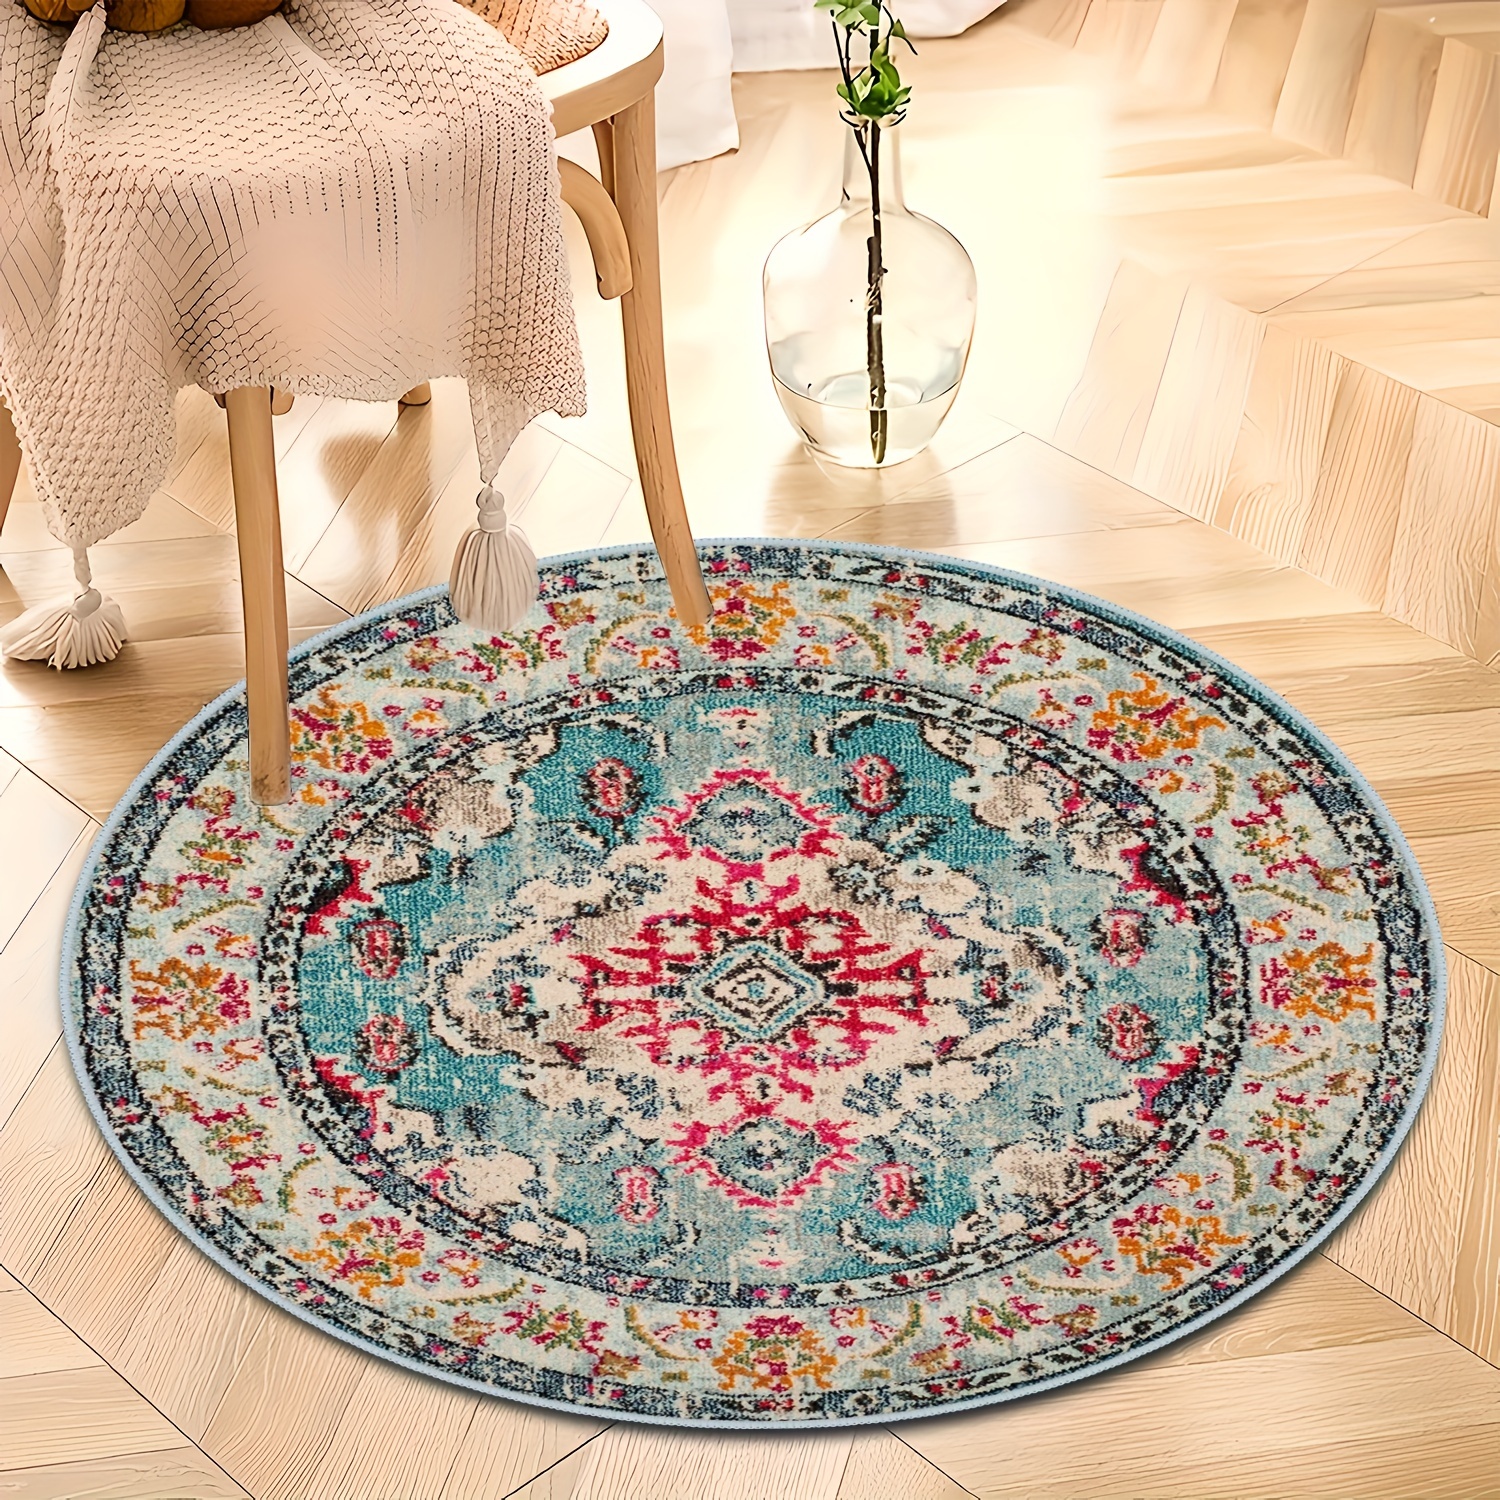 HoaMoya Colorful Cowboy Boots Hats Round Area Rug Blue Board Circle Rug  Carpet Circular Rugs Non Slip Mat for Kitchen Living Room Bedroom  Decoration 2